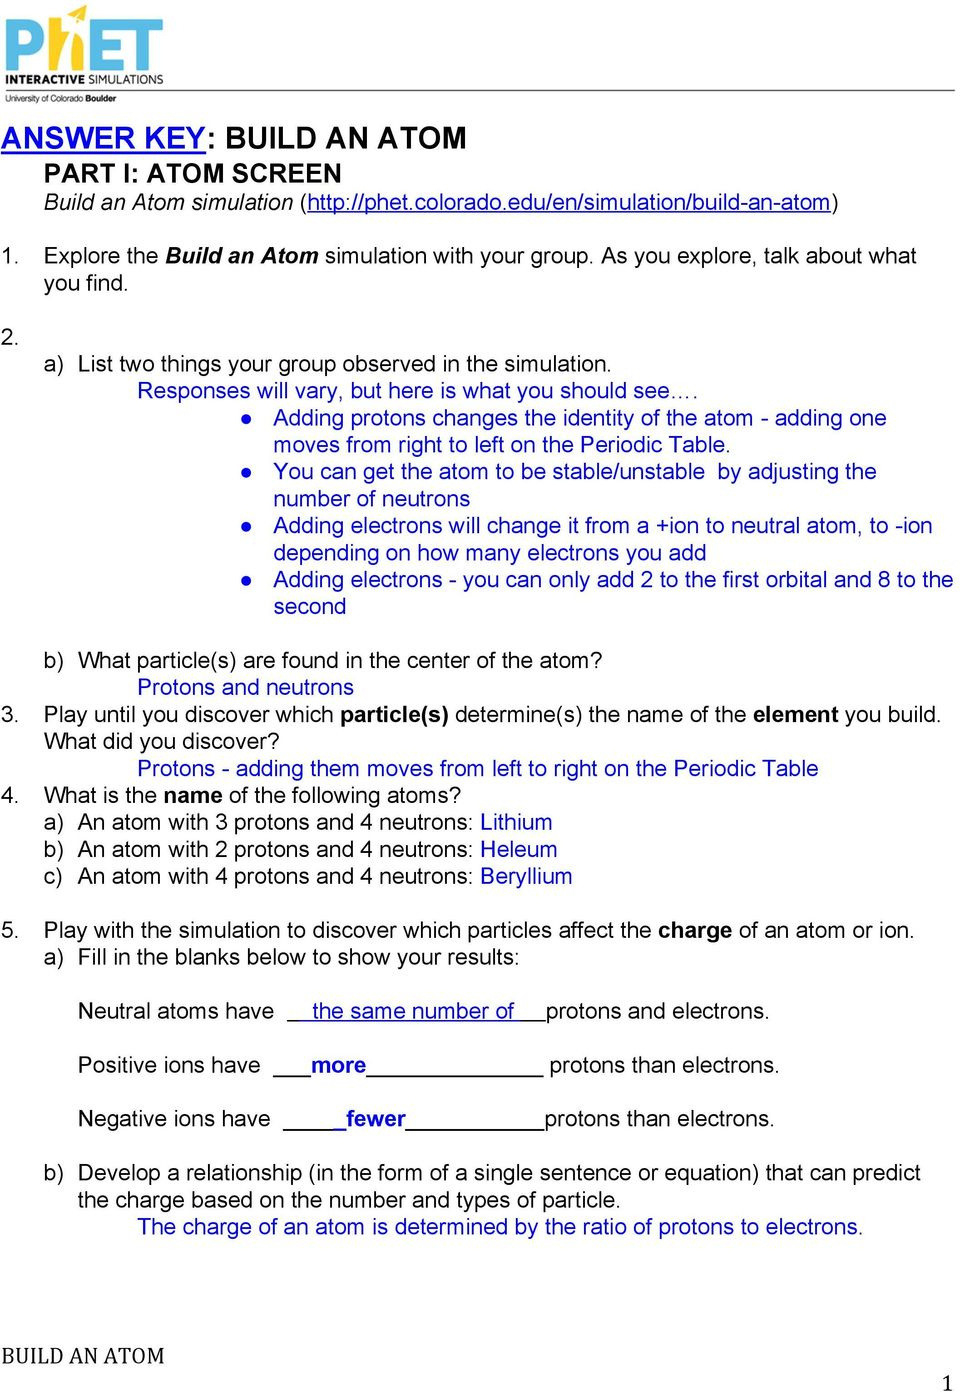 Energy Forms And Changes Simulation Worksheet Answers — db-excel.com